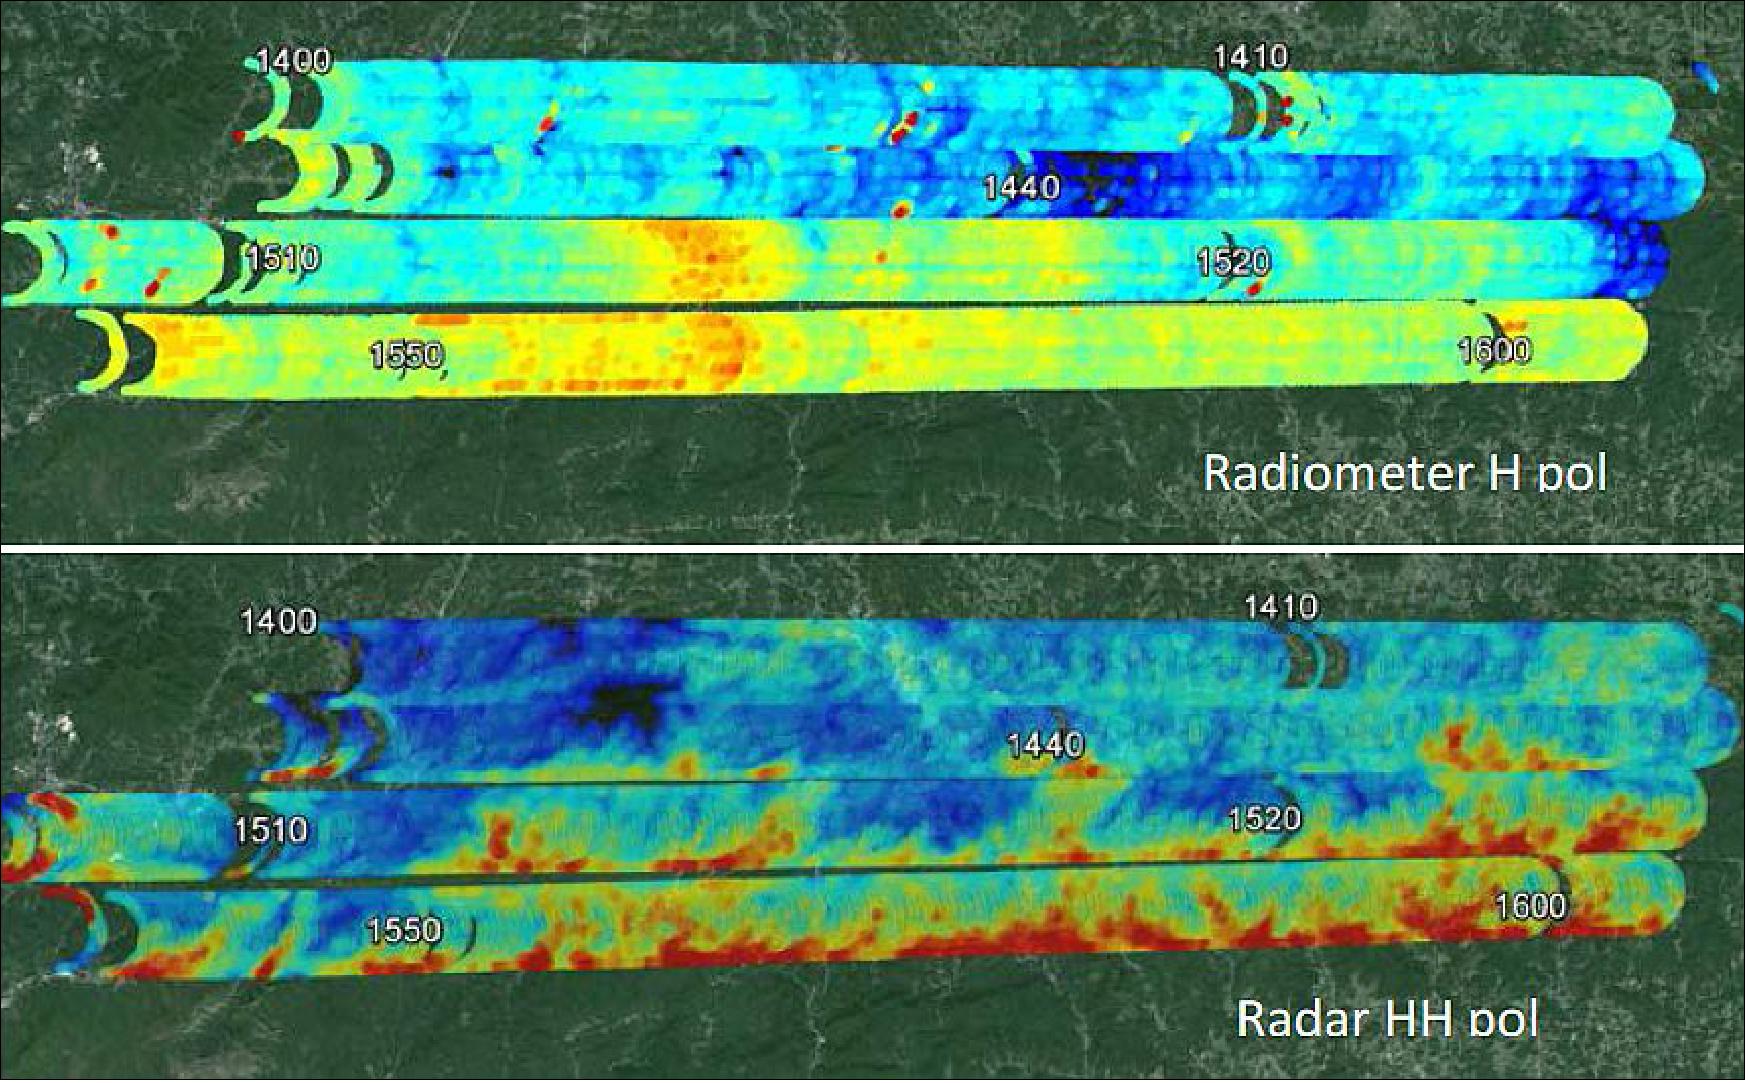 Figure 87: Simultaneous radiometer (top) and radar (bottom) imagery from IPHEX campaign. NE-facing fore half scans. The resolution varies from 200 m to 1000 m due to variable topography (image credit: NASA/GSFC)